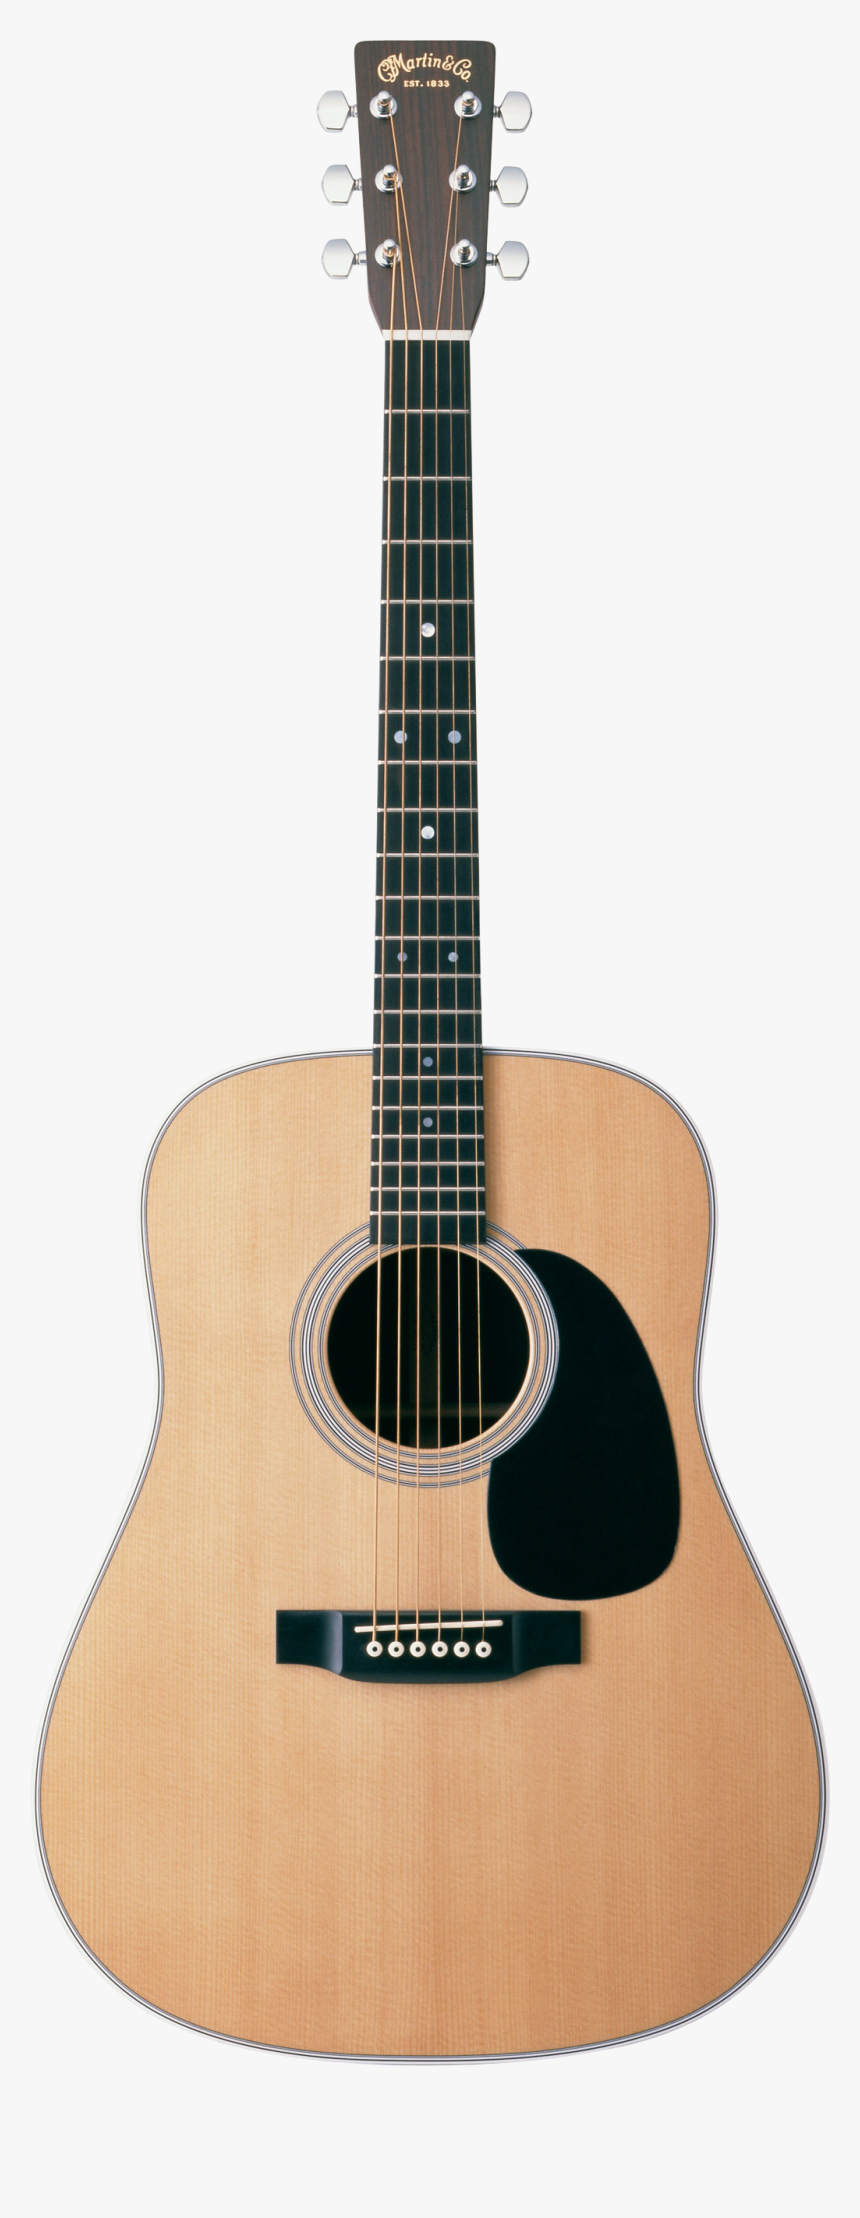 Acoustic Classic Guitar Png Image - Martin Hd 28, Transparent Png, Free Download